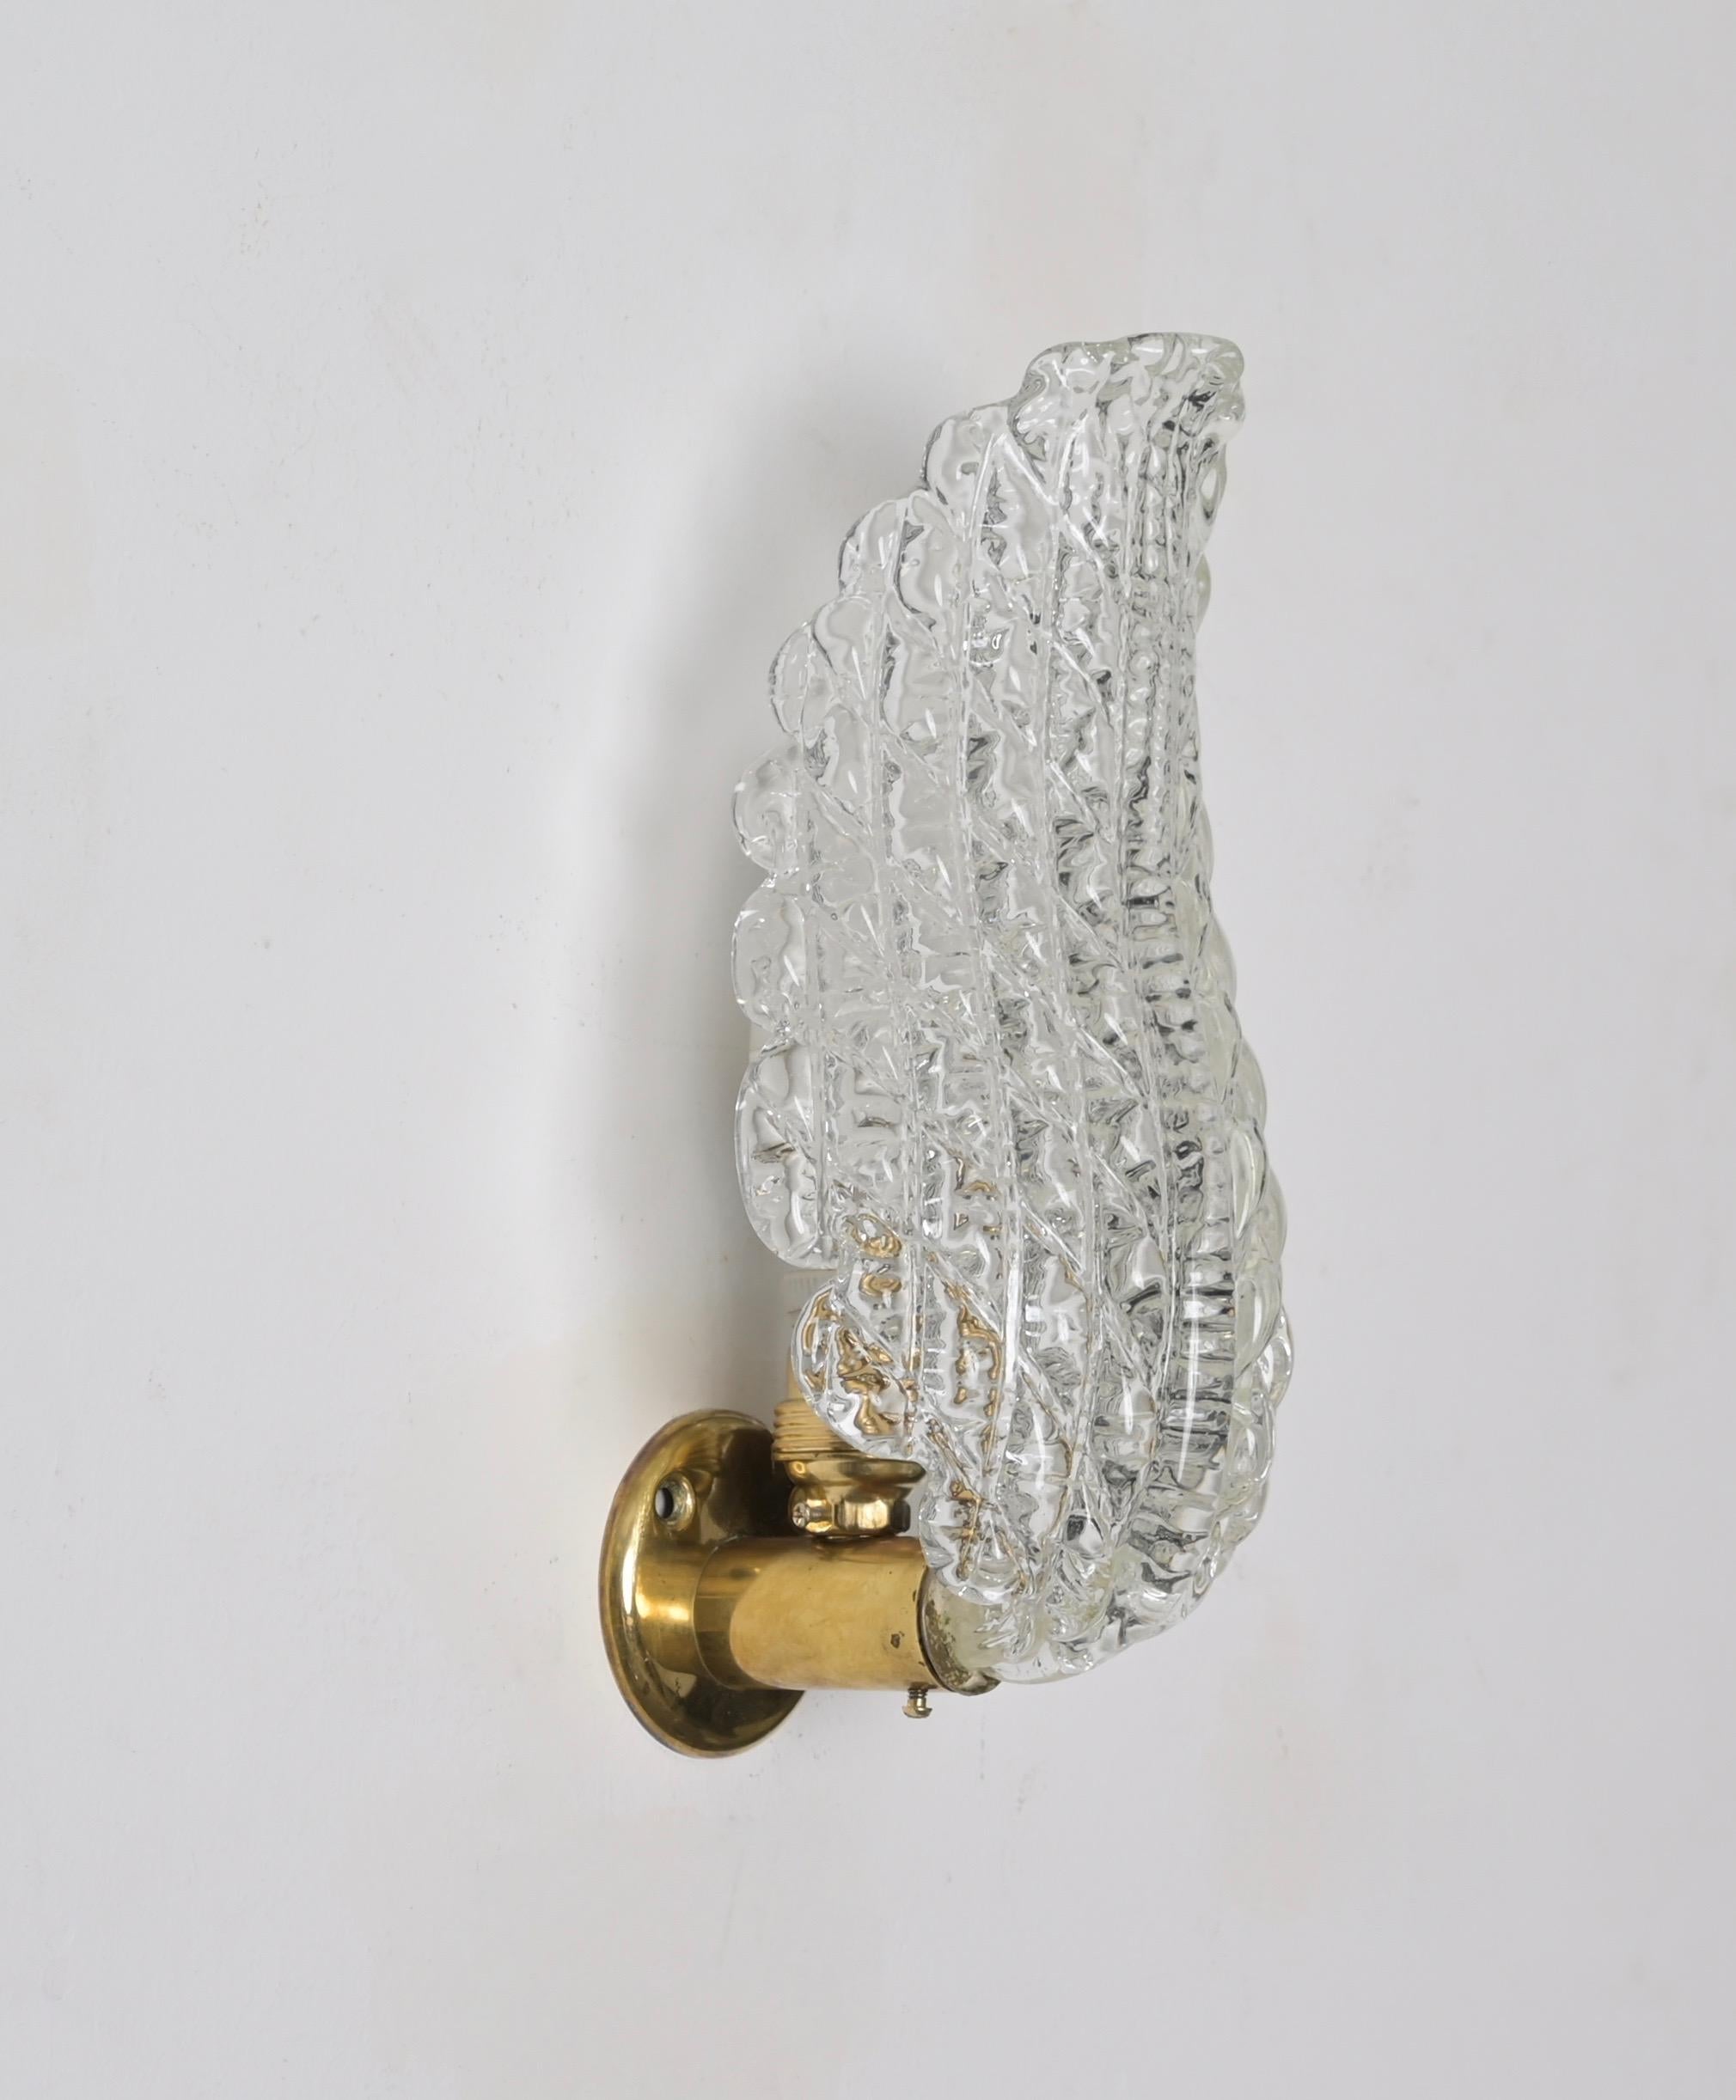 Italian Pair of Midcentury Murano Glass and Brass Leaf Sconces, by Barovier, Italy 1950s For Sale